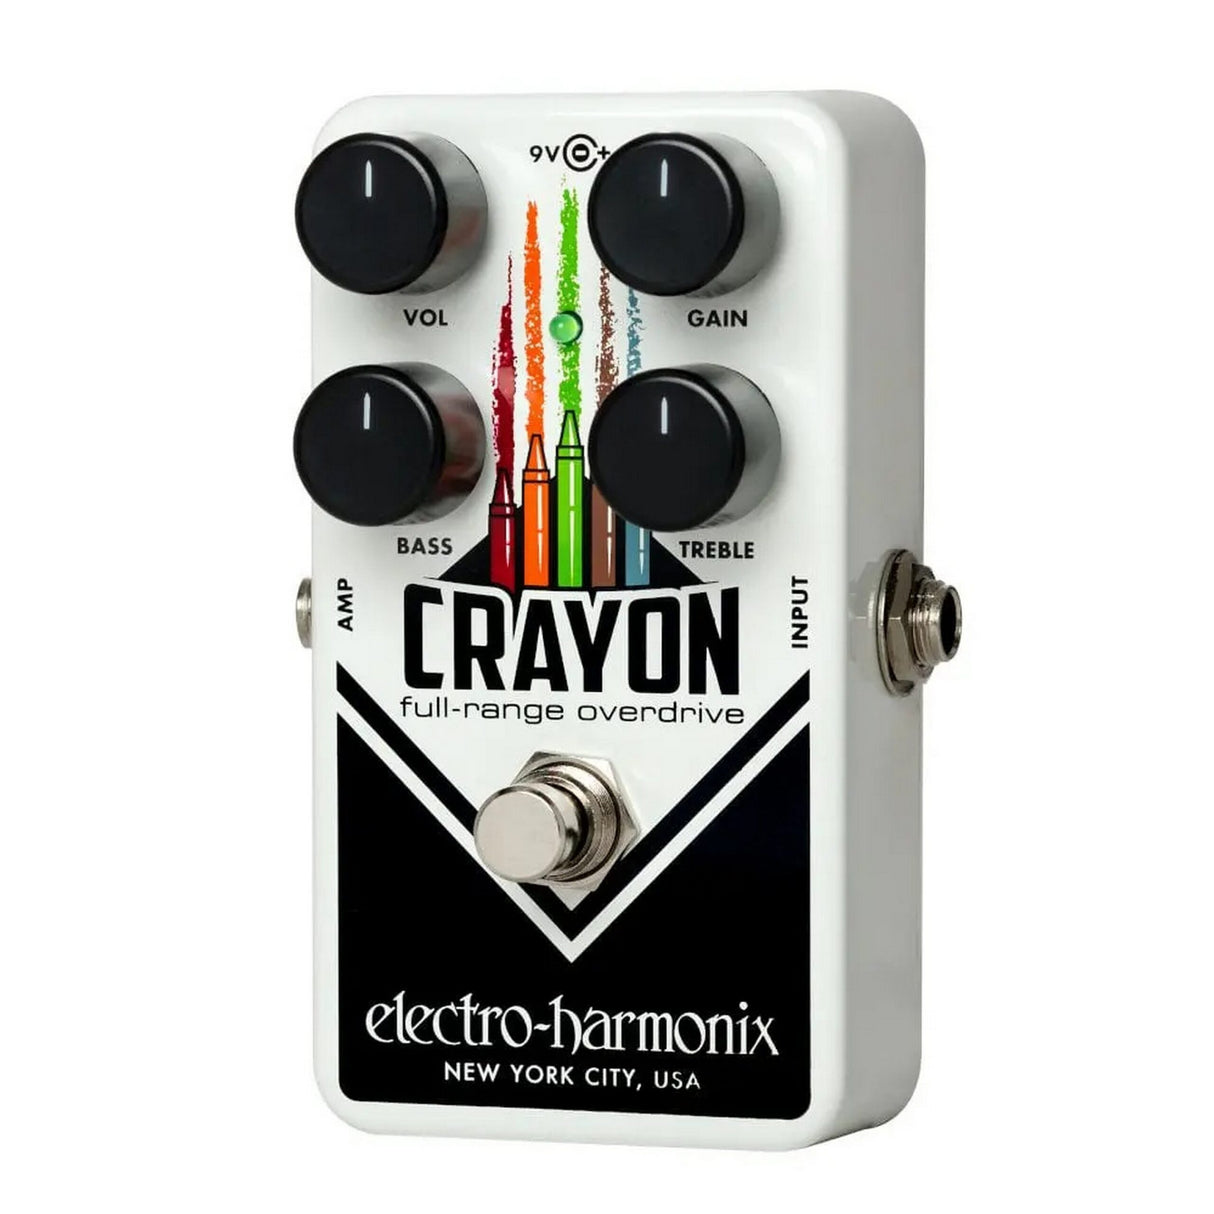 Electro-Harmonix Crayon Full Range Overdrive Guitar Effects Pedal (Used)